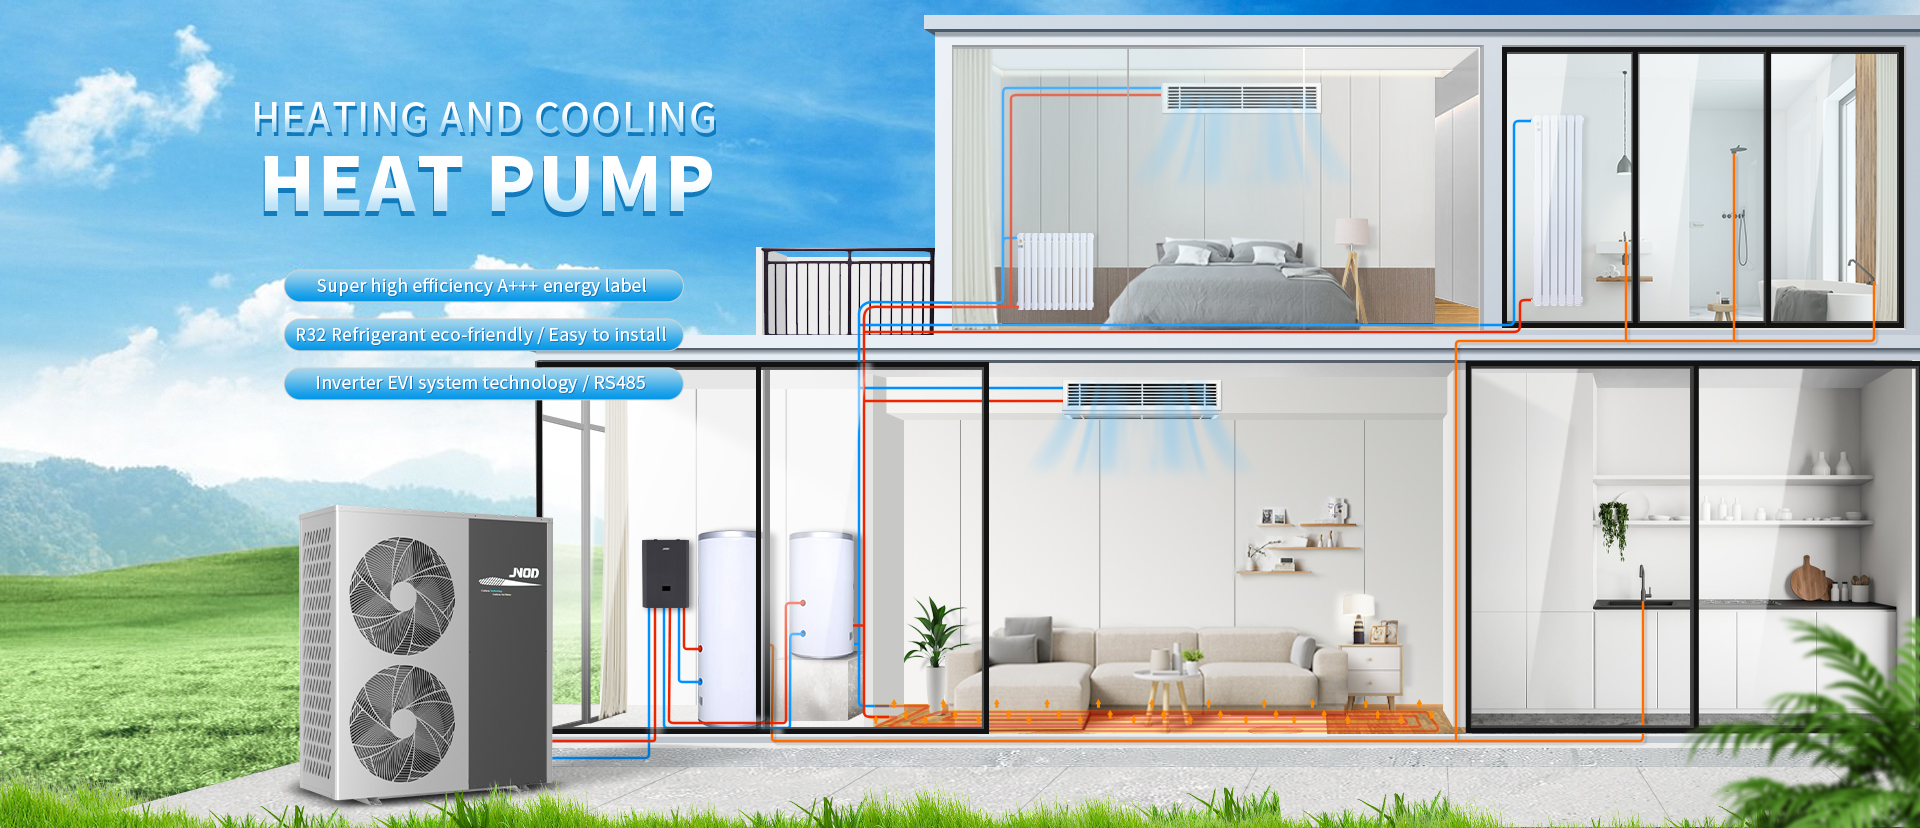 Earth Heating And Cooling Heat Pump